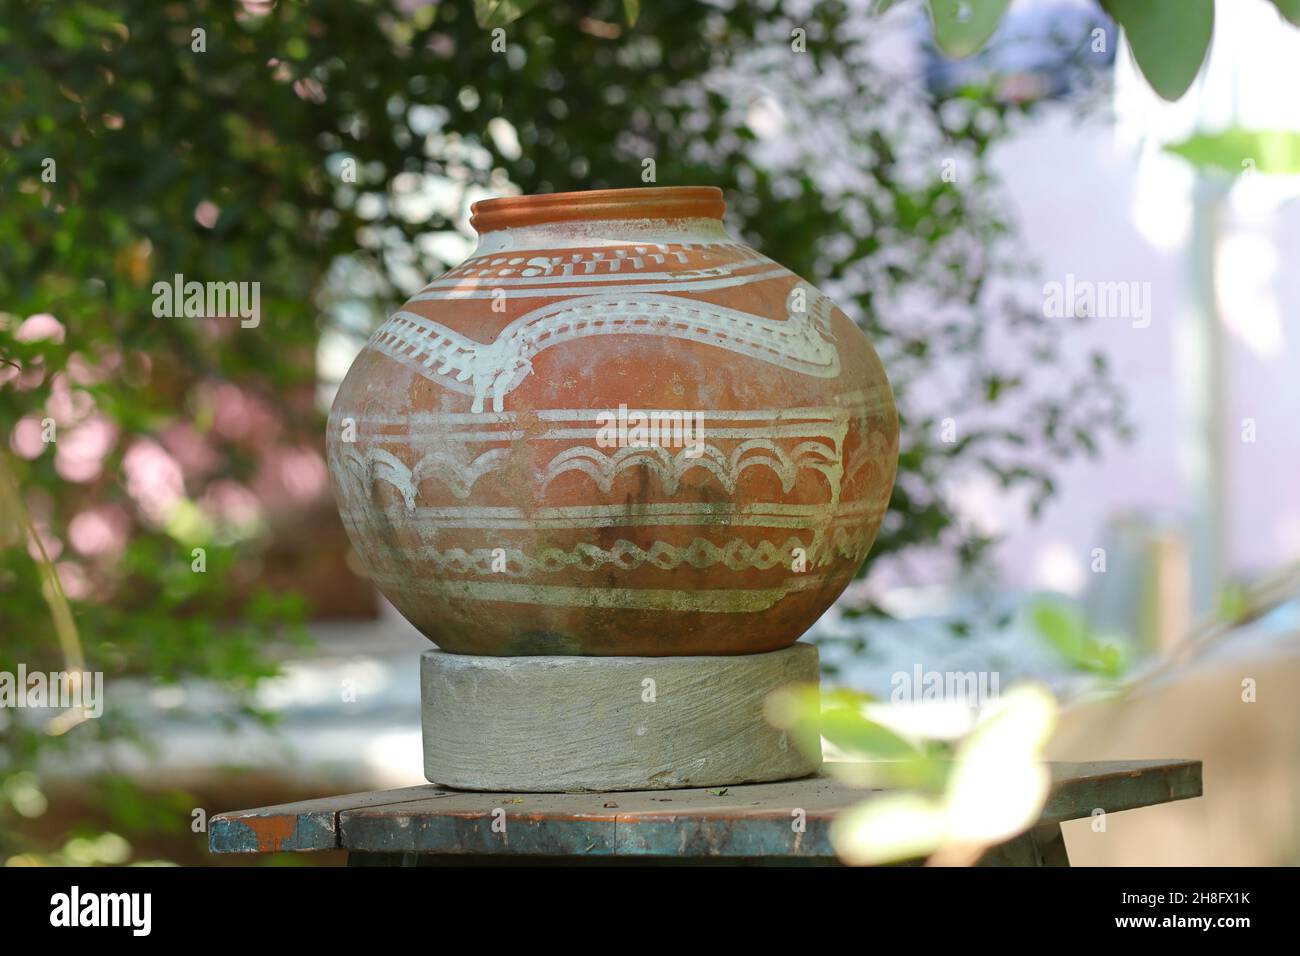 https://c8.alamy.com/comp/2H8FX1K/close-up-photo-shot-of-a-water-pot-made-of-clay-kept-in-the-open-outside-and-hand-painted-white-design-on-it-2H8FX1K.jpg